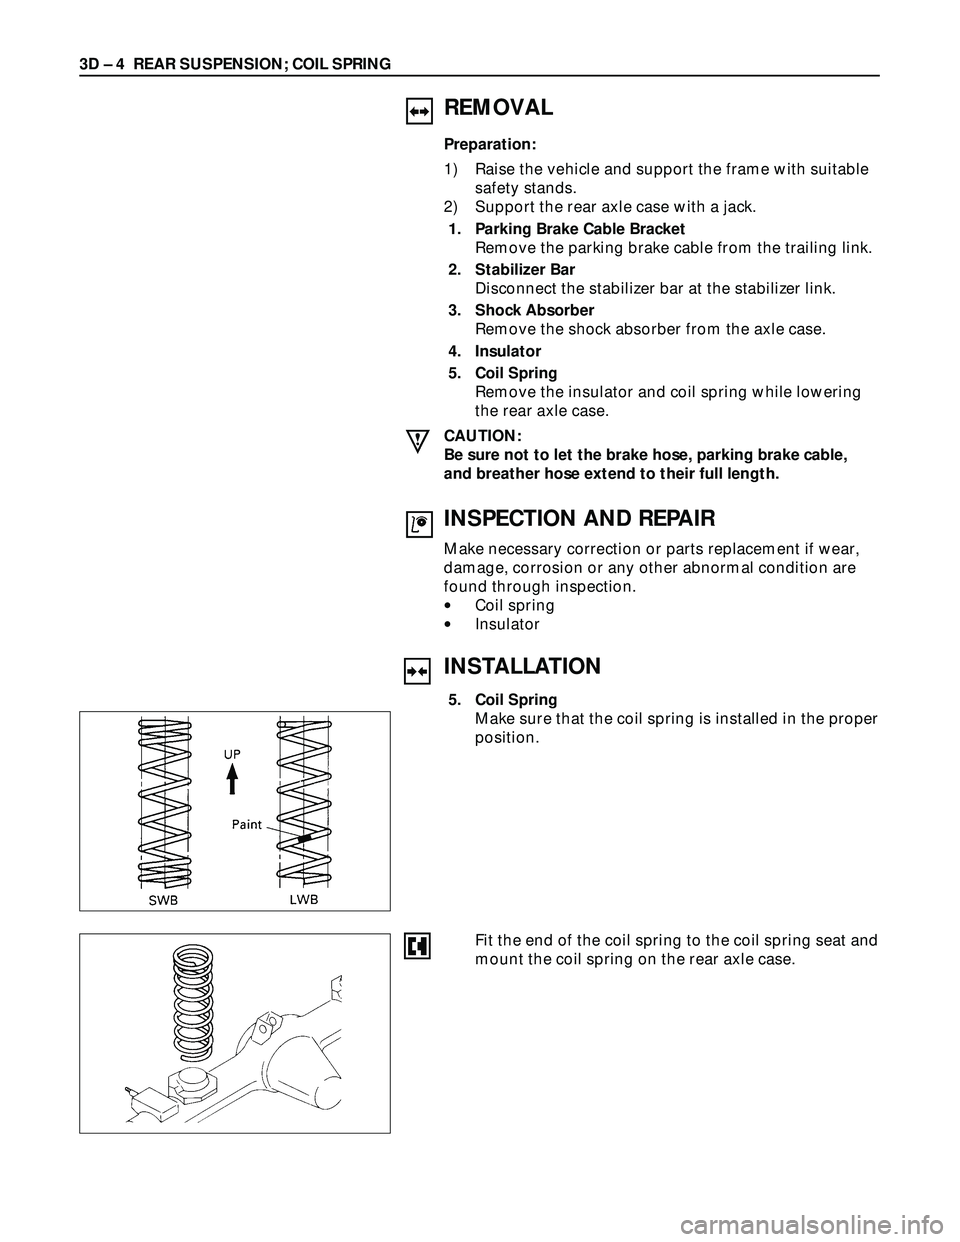 ISUZU TROOPER 1998  Service Repair Manual 3D – 4 REAR SUSPENSION; COIL SPRING
INSTALLATION
5. Coil Spring
Make sure that the coil spring is installed in the proper
position.
REMOVAL
Preparation:
1) Raise the vehicle and support the frame wi